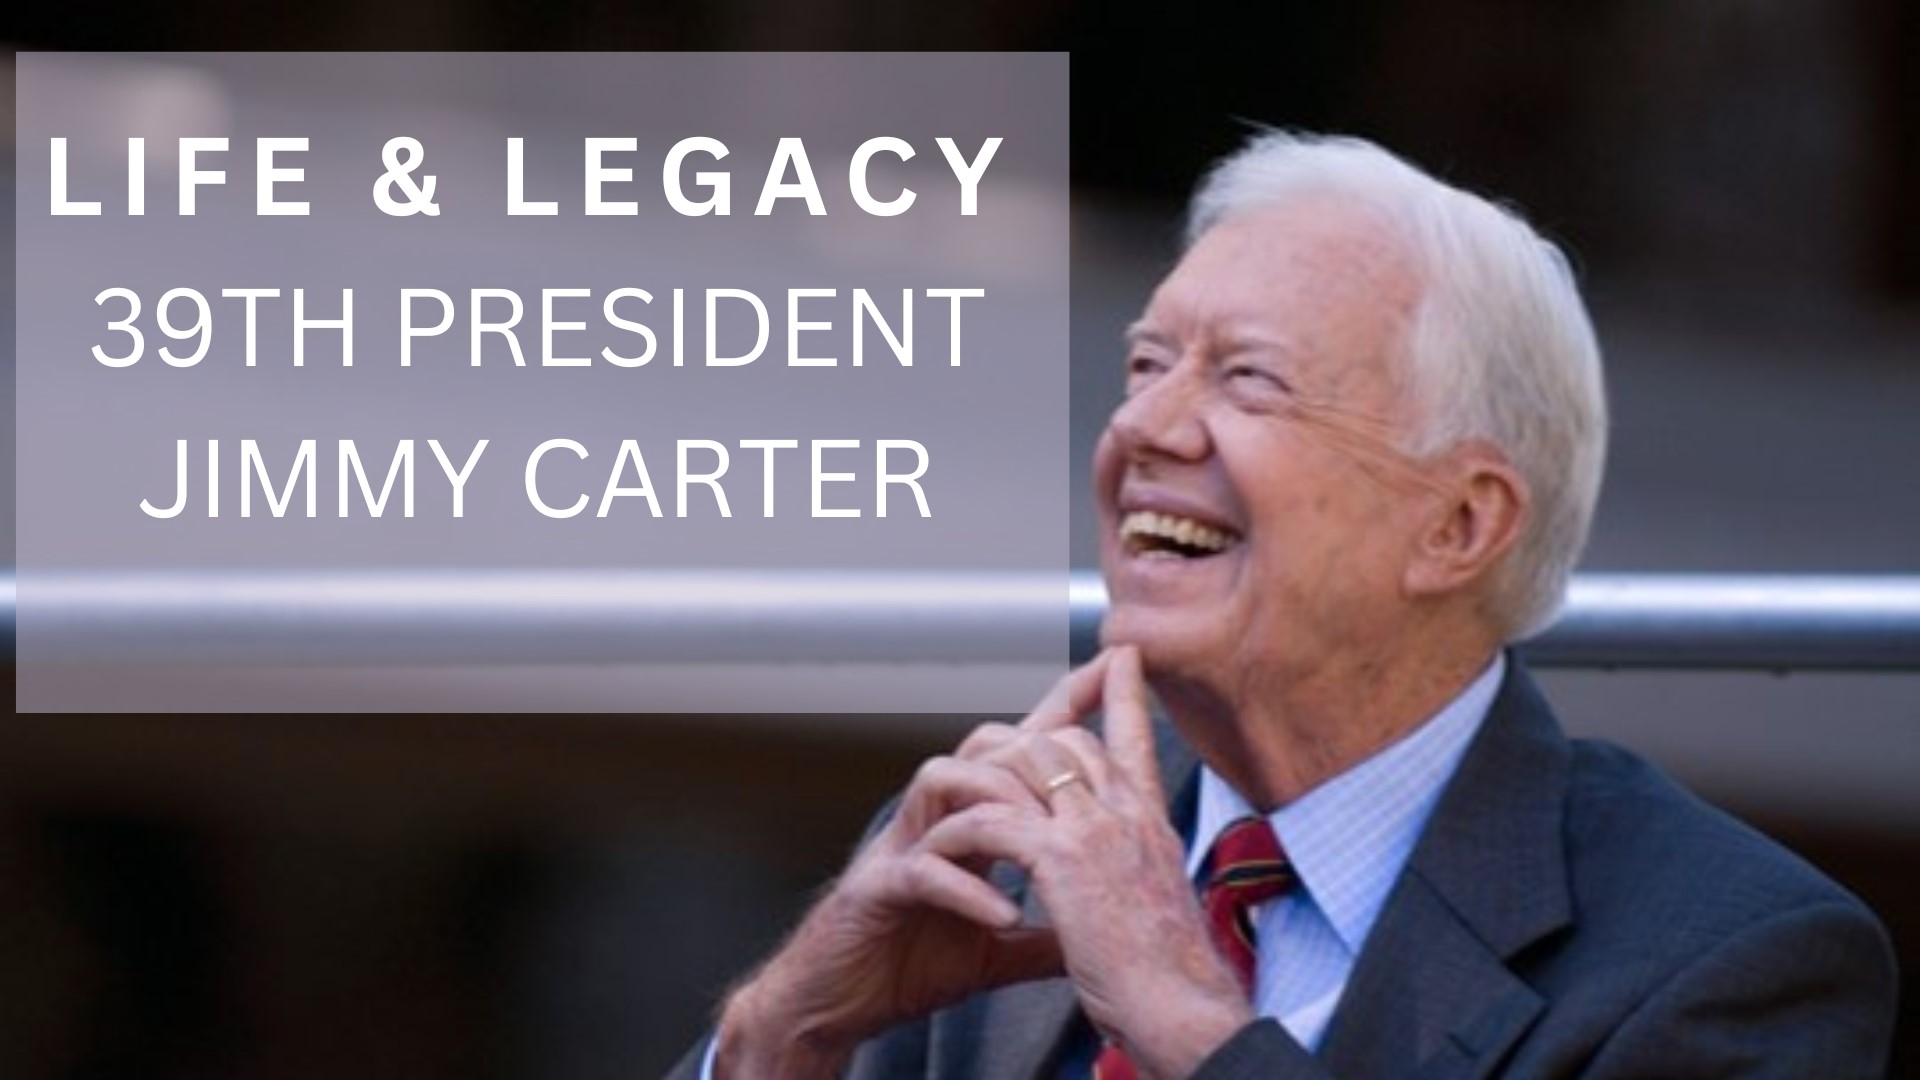 The Carter Center confirmed Jimmy Carter, 98, will spend his remaining days in home hospice care in Plains, Georgia, after a series of short hospital stays.